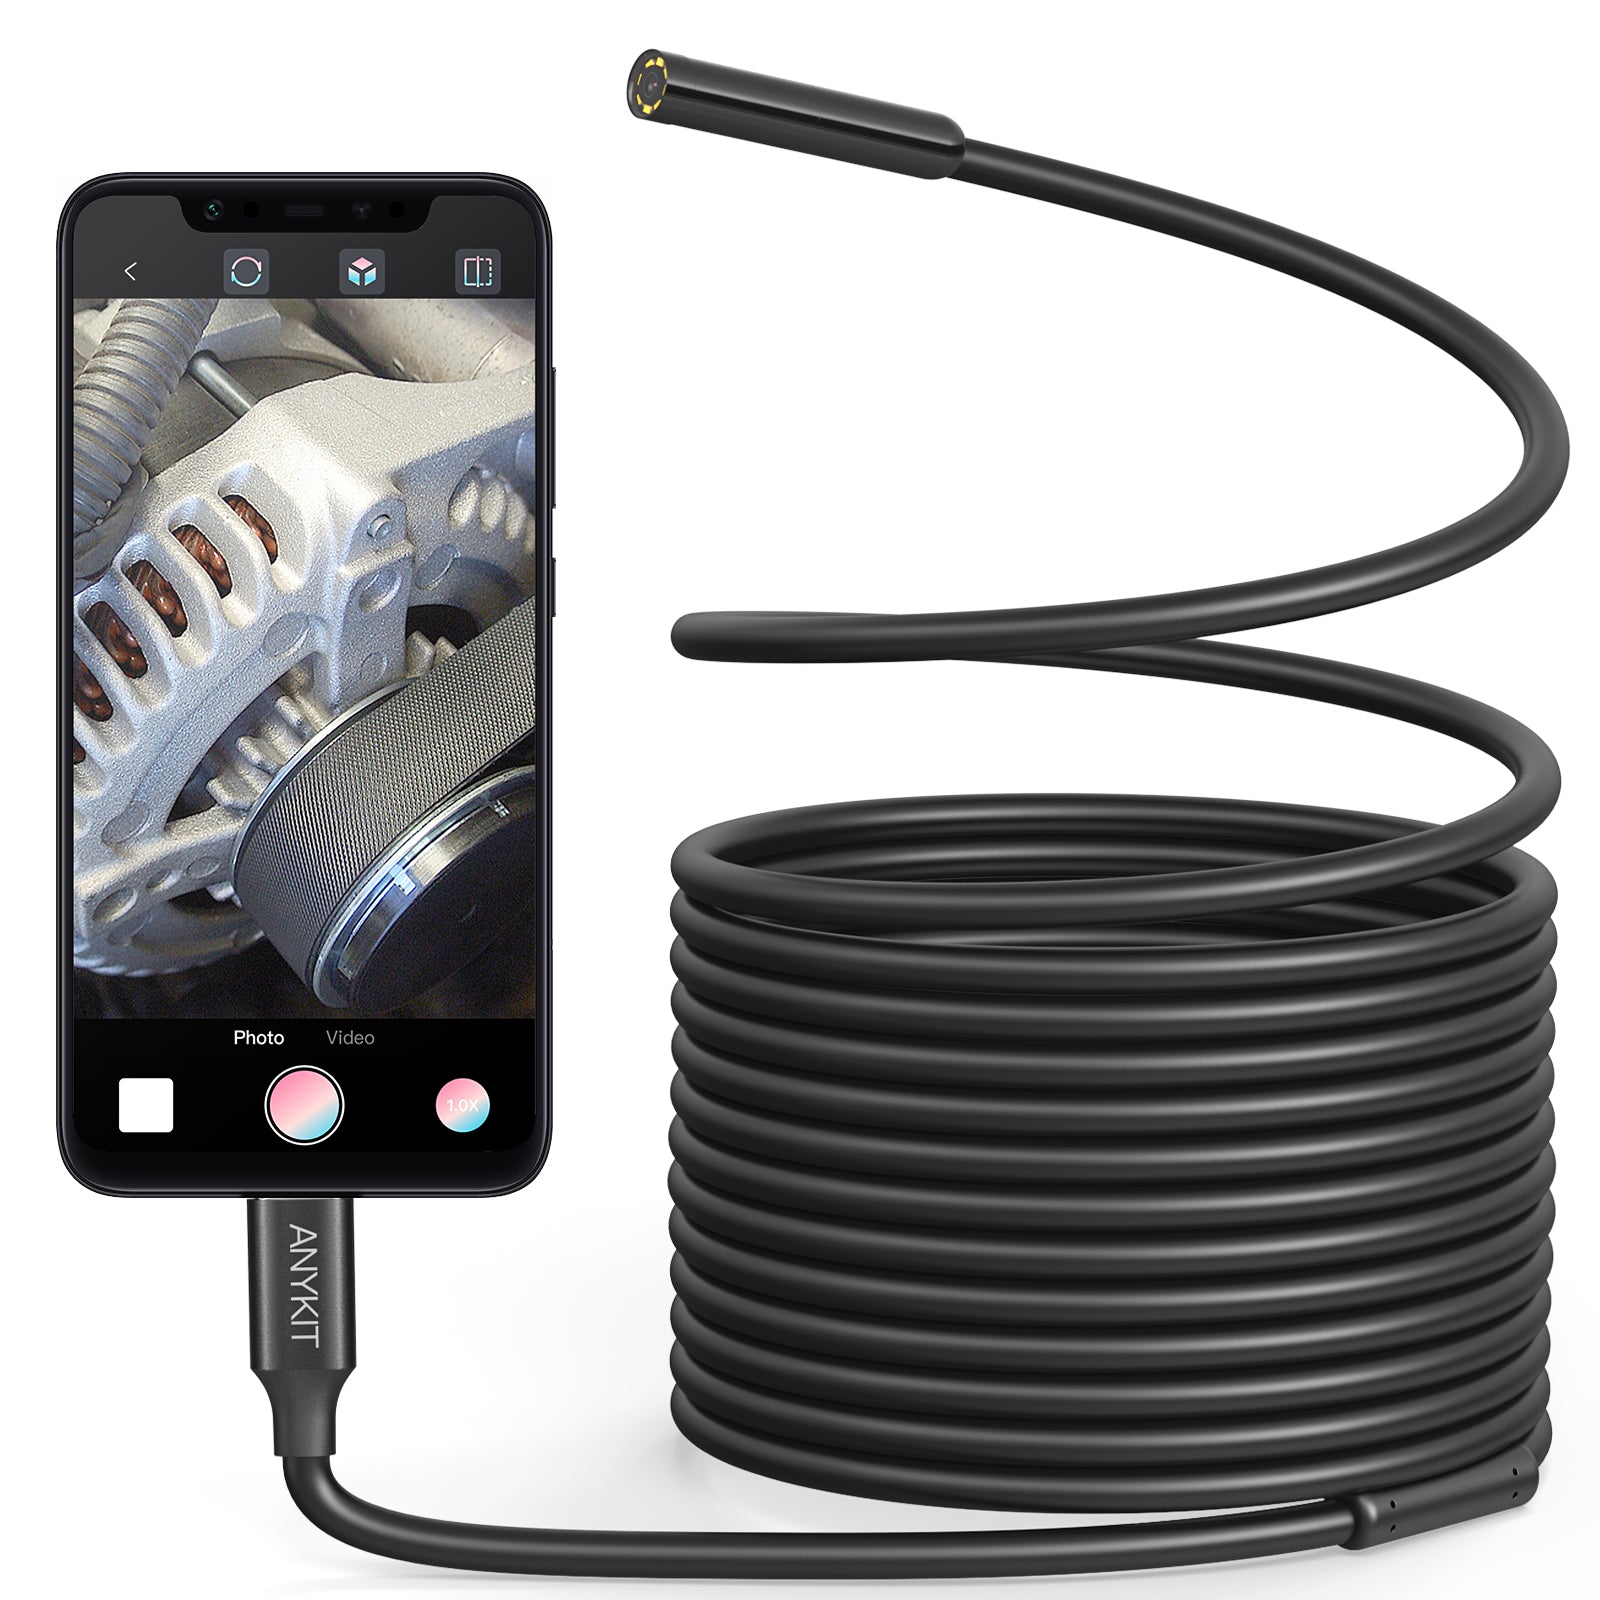 Anykit Endoscope Camera, 2 in 1 USB Inspection Camera with 8 LED Lights, Borescope with 10ft Semi-Rigid Cable, Type-C Snake Camera, IP67 Waterproof Scope Camera for iPhone, iPad, OTG Android Phone